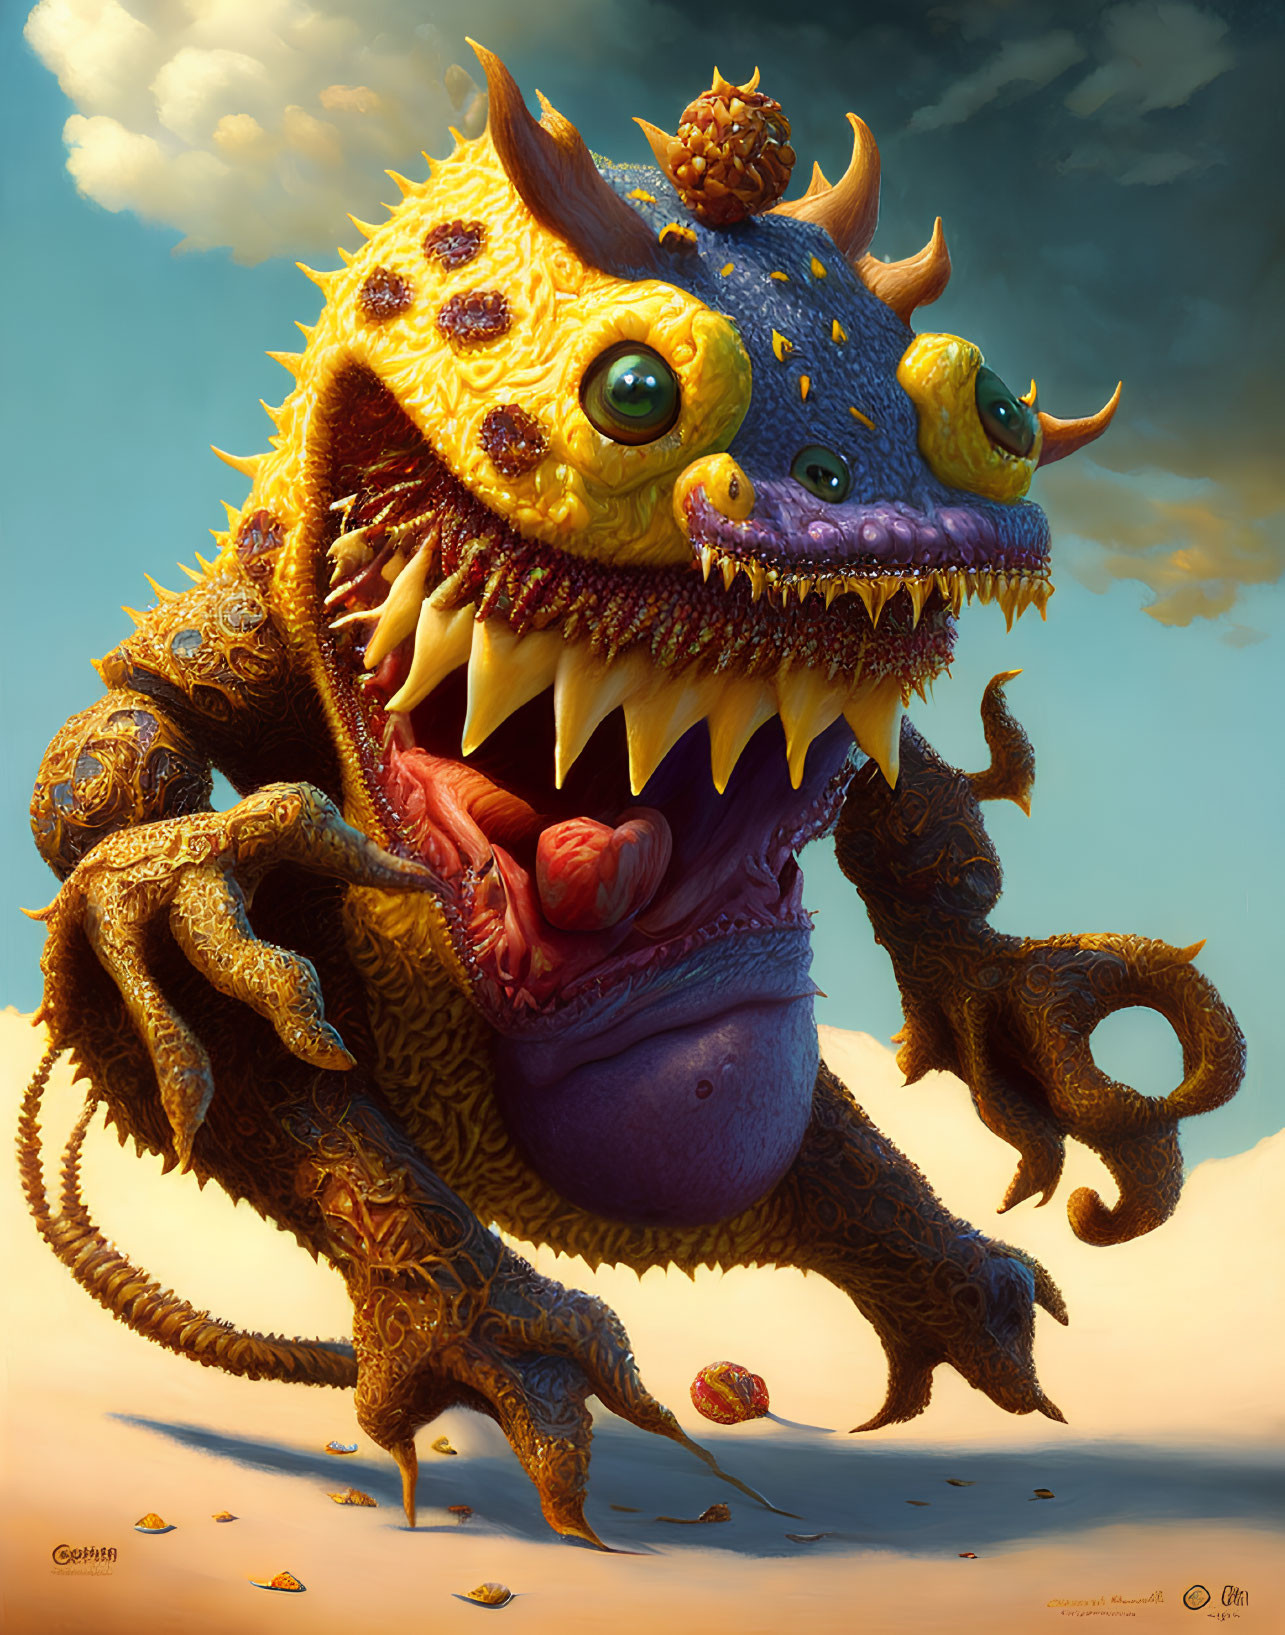 Colorful fantasy monster with multiple eyes and sharp teeth on textured skin